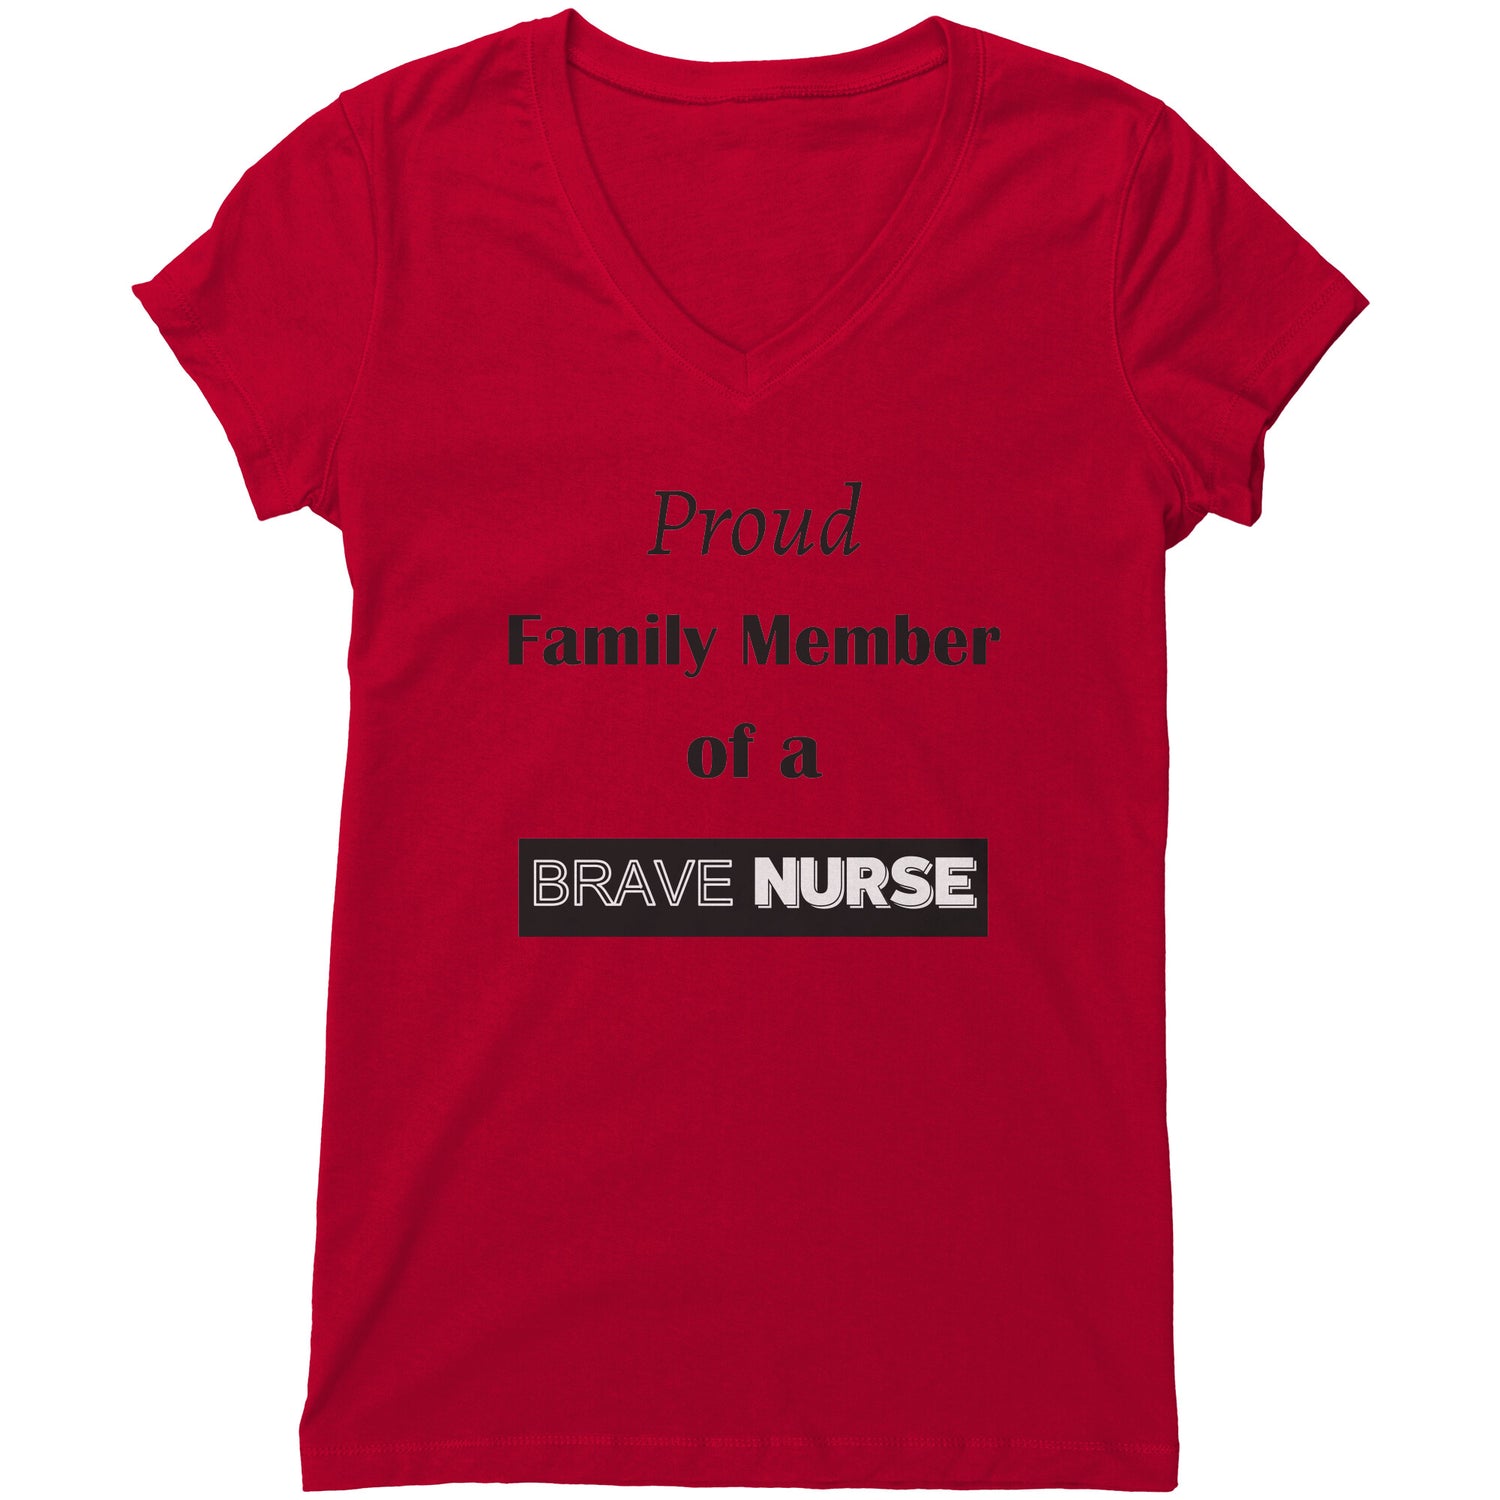 Proud Family Member of a Brave Nurse Lettering Womens Shirt - Signs and Seasons Gifts